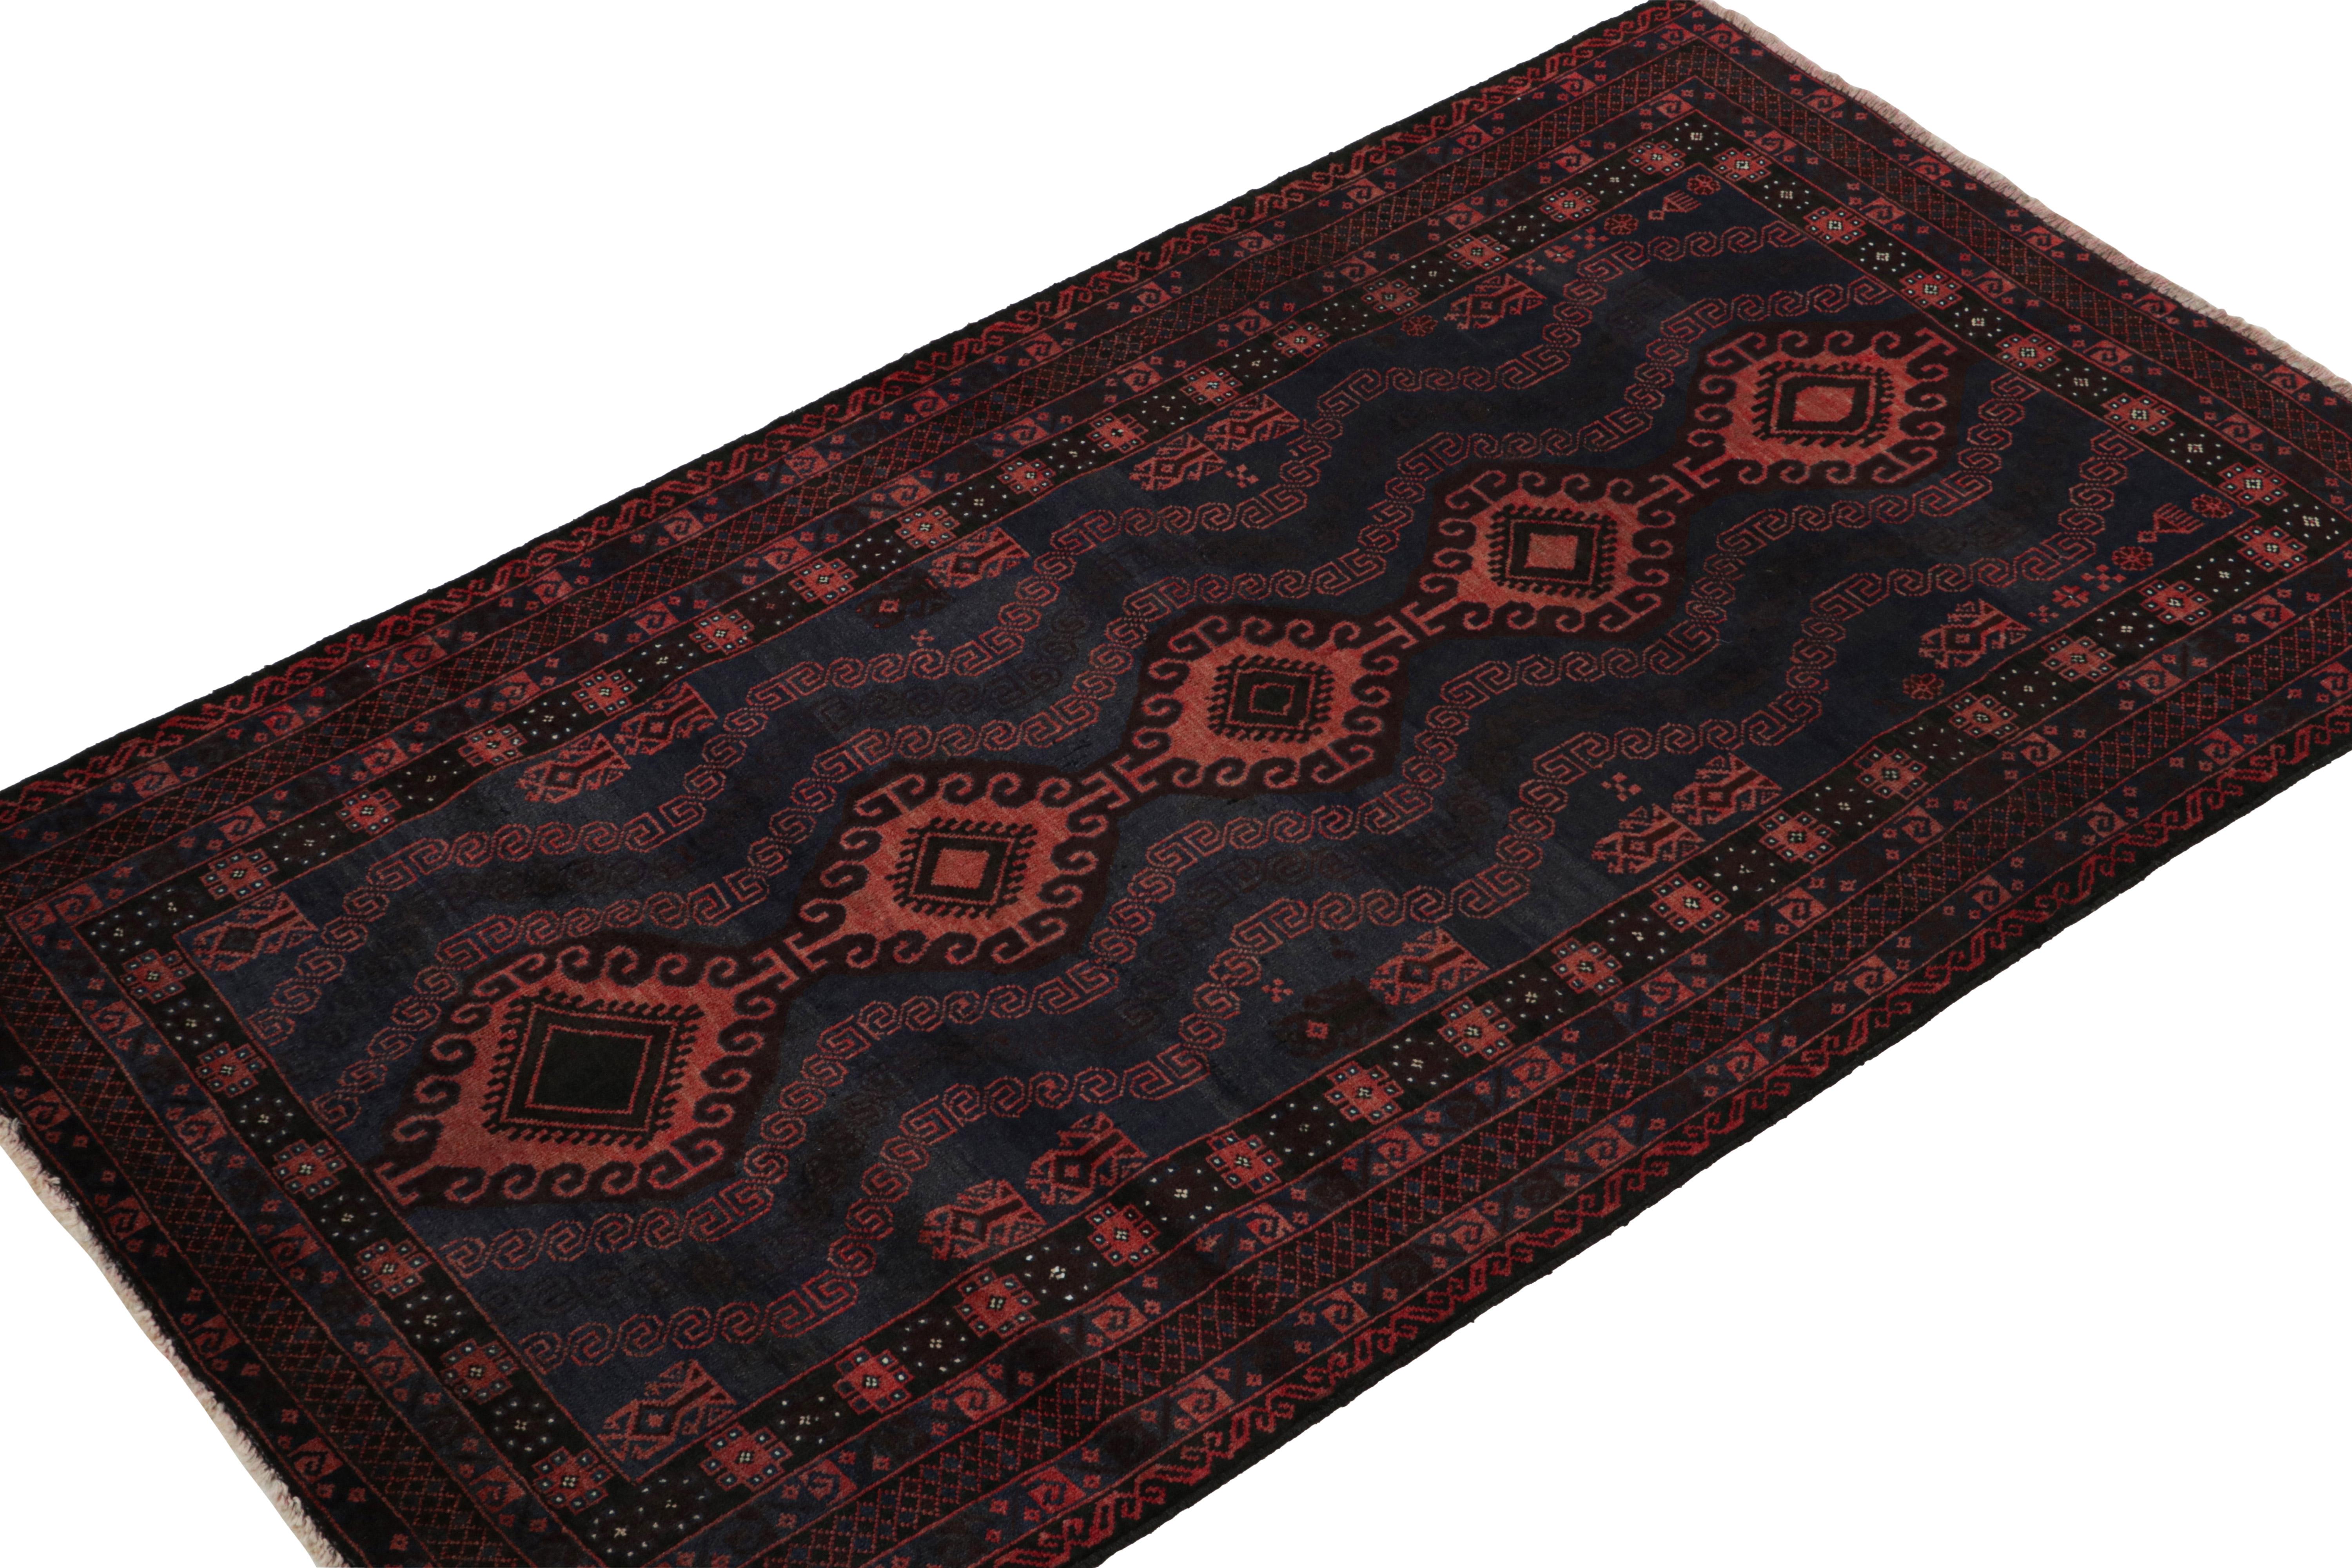 Hand-knotted in wool & goat hair, this vintage tribal rug of the 1950s is a coveted addition to Rug & Kilim’s Antique & Vintage collection. 

On the Design: 

Coming from the Baluch tribe, this 4x7 rug boasts patterns in rich tones of red, blue &